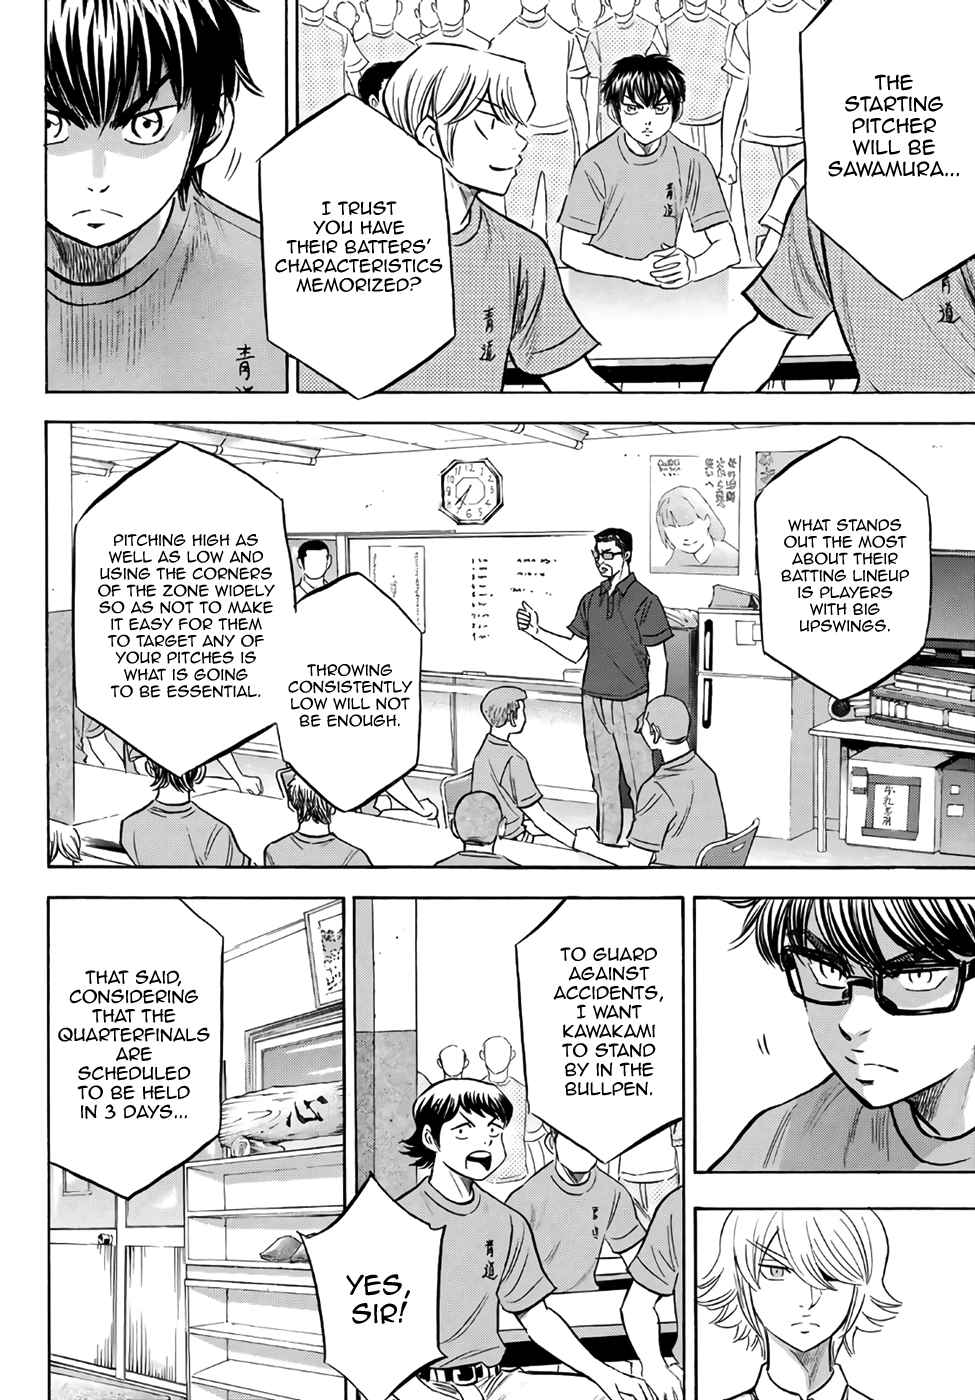 Diamond no Ace Act II Ch. 188 The Embodiment of Hopes